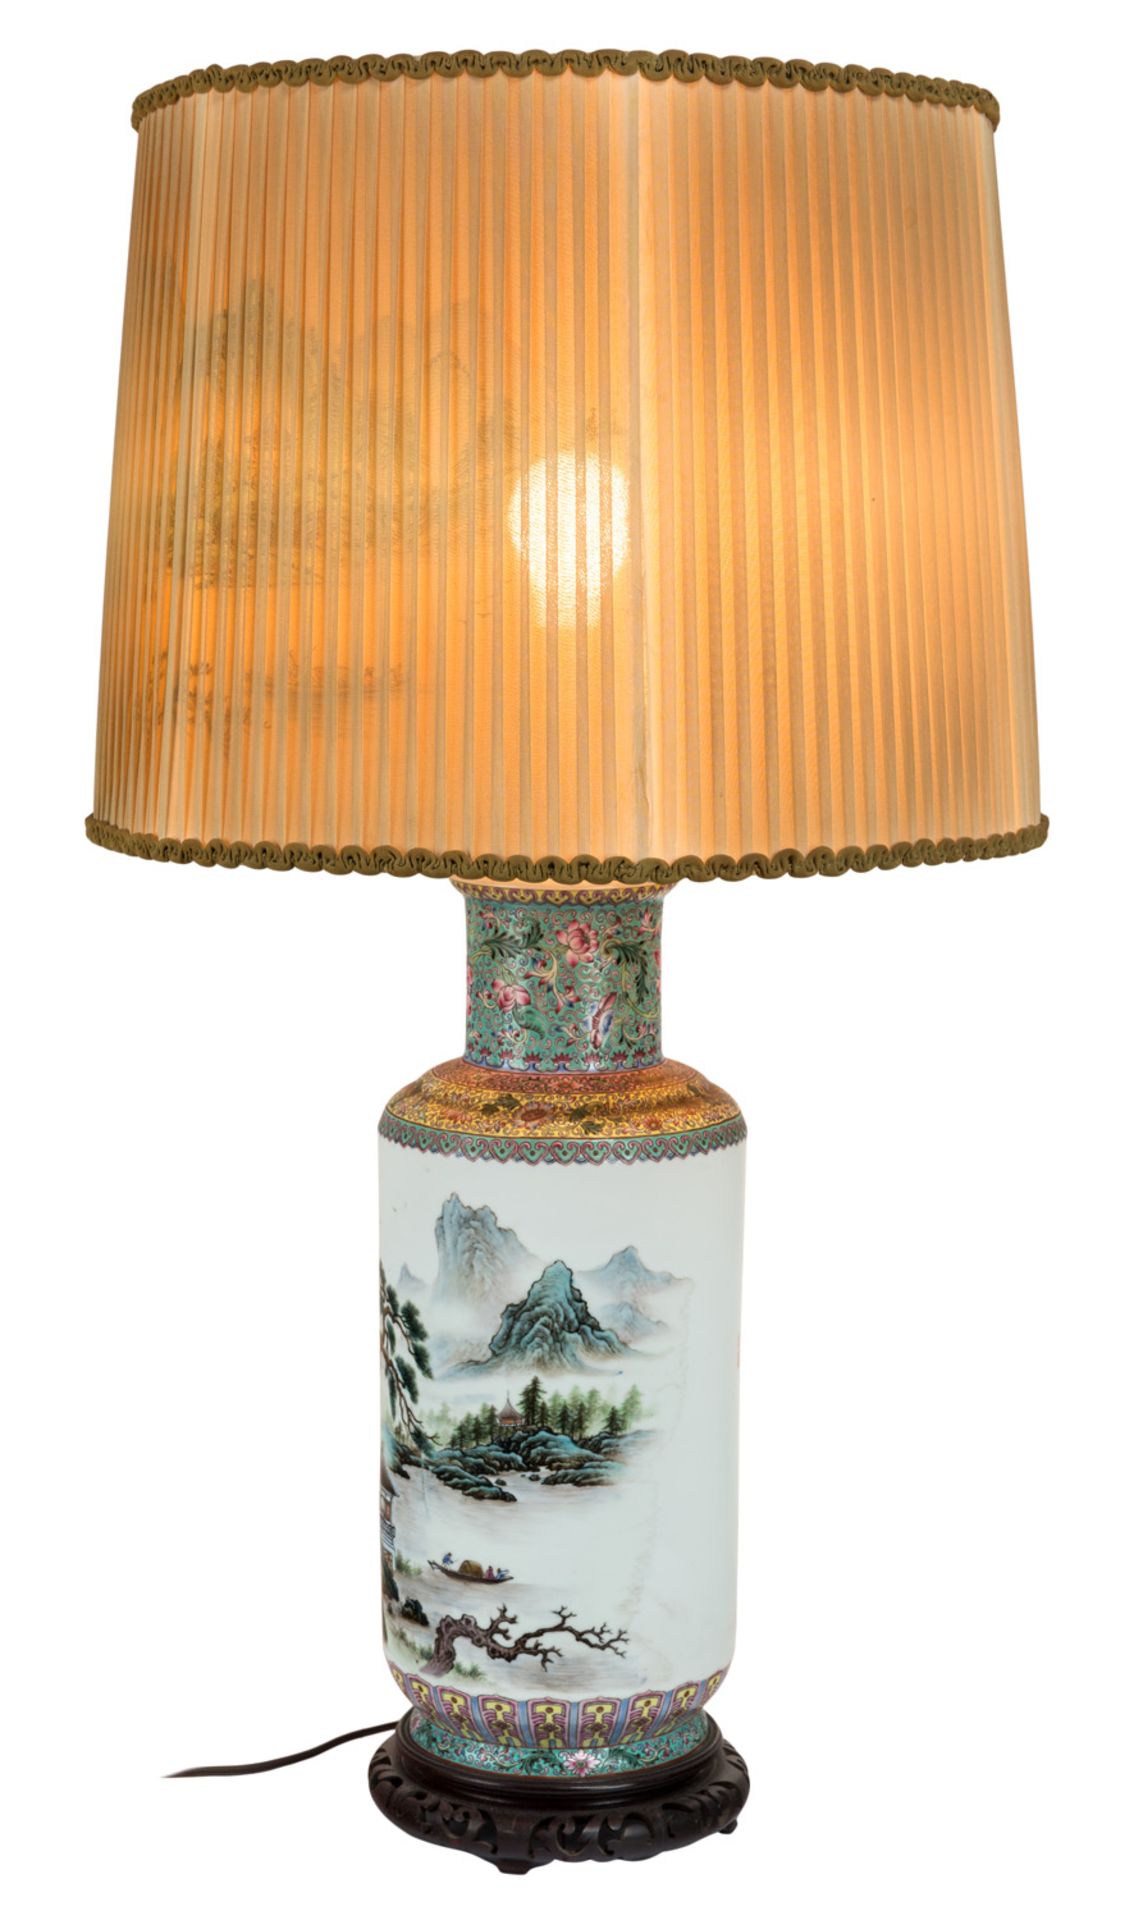 A CHINESE PORCELAIN LAMP AND UMBRELLA STAND (REPUBLIC PERIOD, 1912-1949) - Image 10 of 14